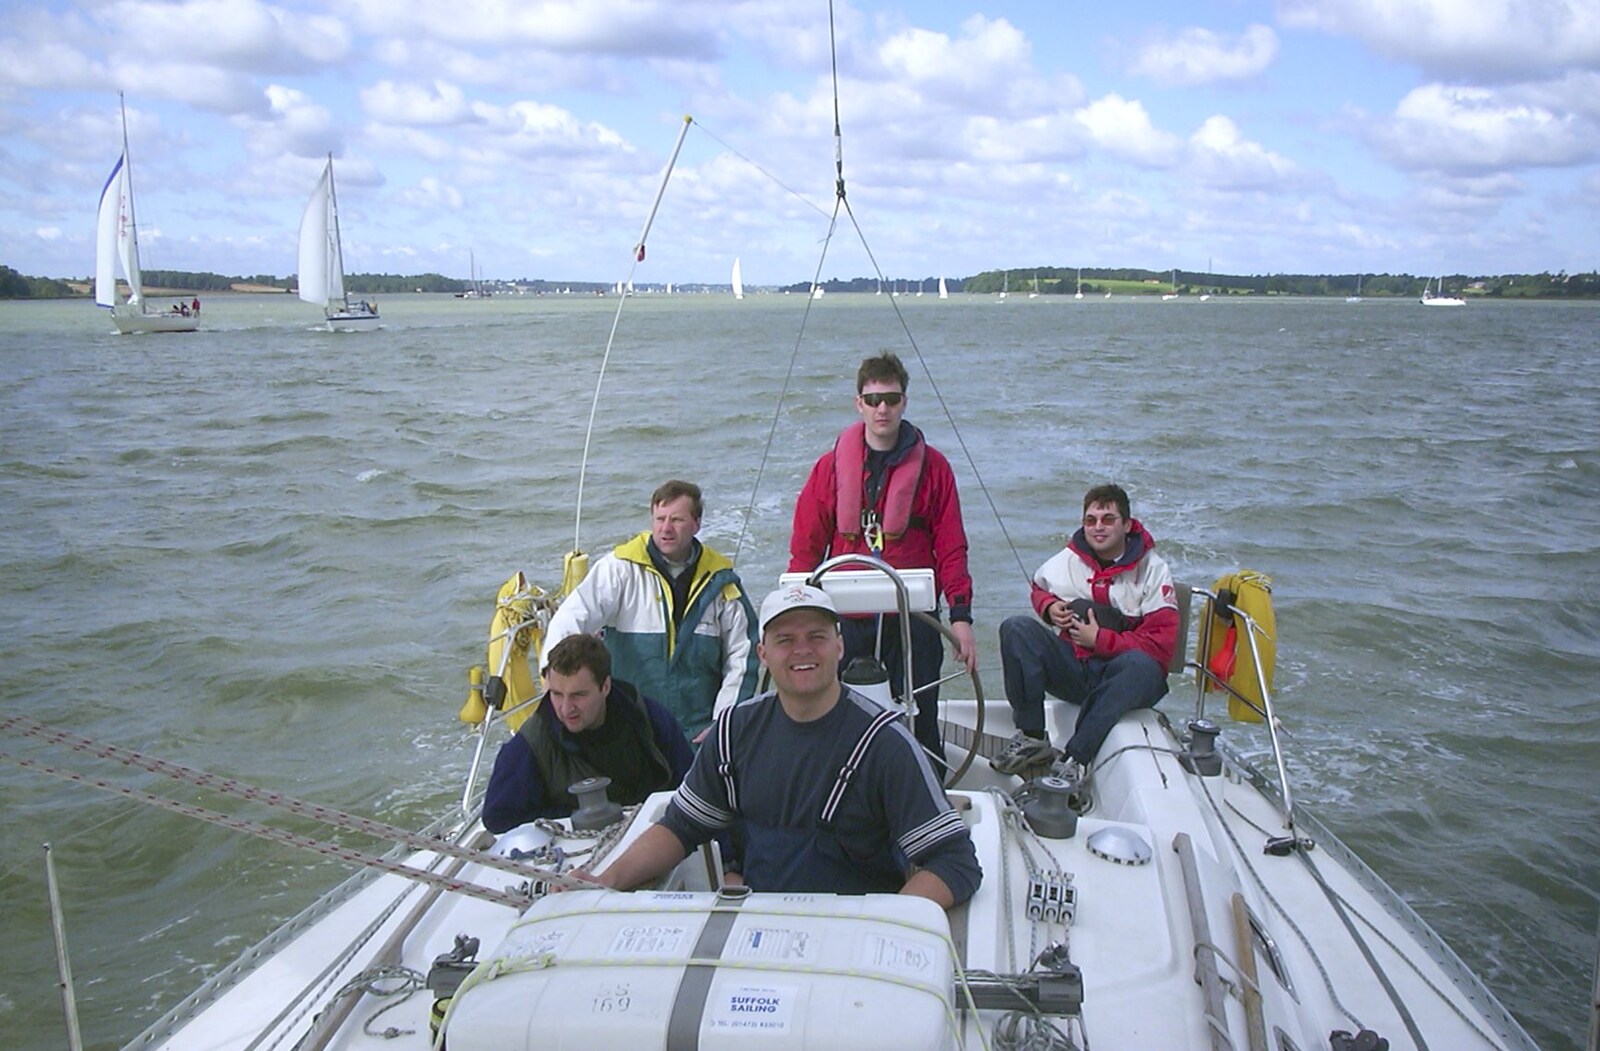 A 3G Lab Sailing Trip, Shotley, Suffolk - 6th September 2001: Sailing downwind, Stef at the helm